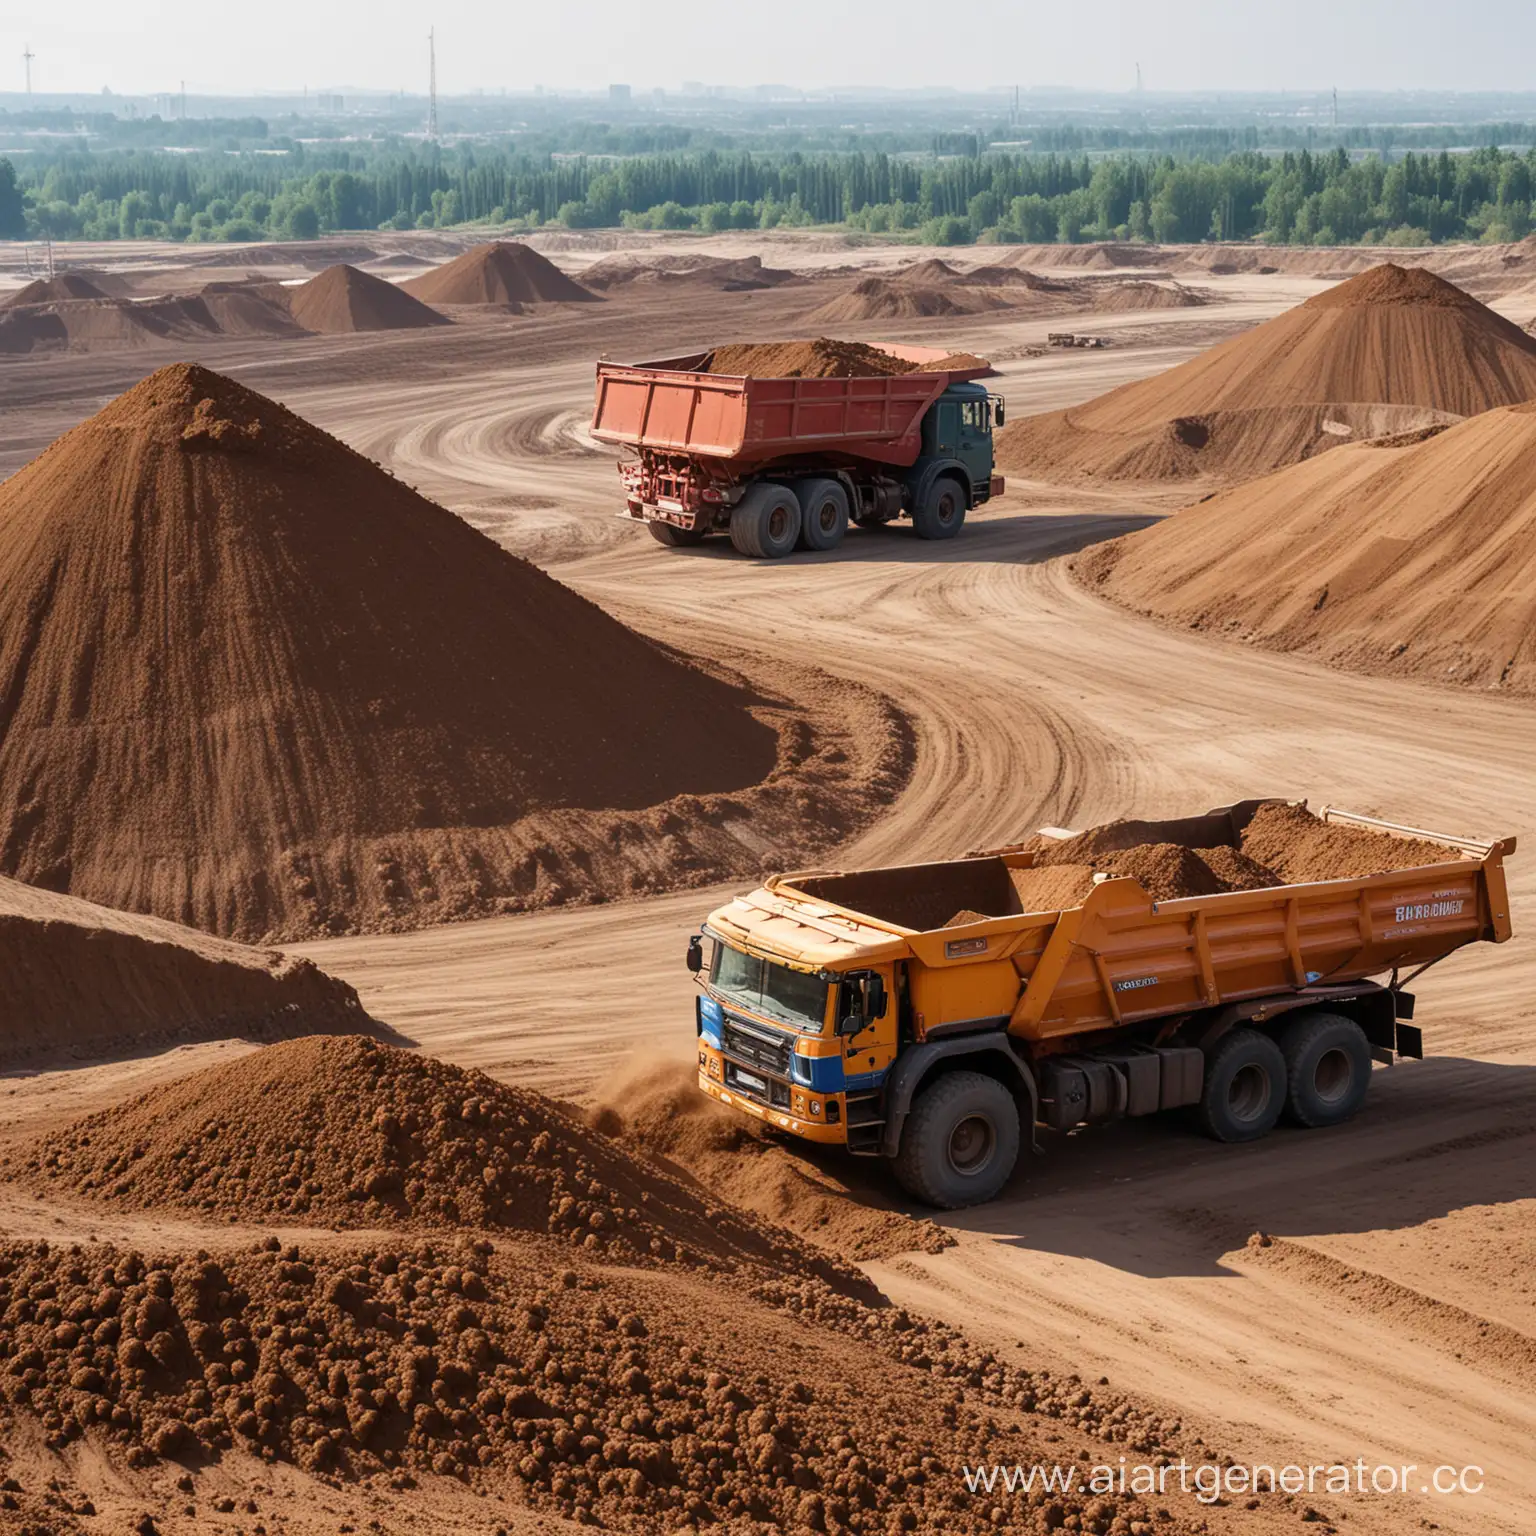 Dump-Trucks-Transporting-Soil-Realistic-Photo-of-Heavy-Equipment-in-Action